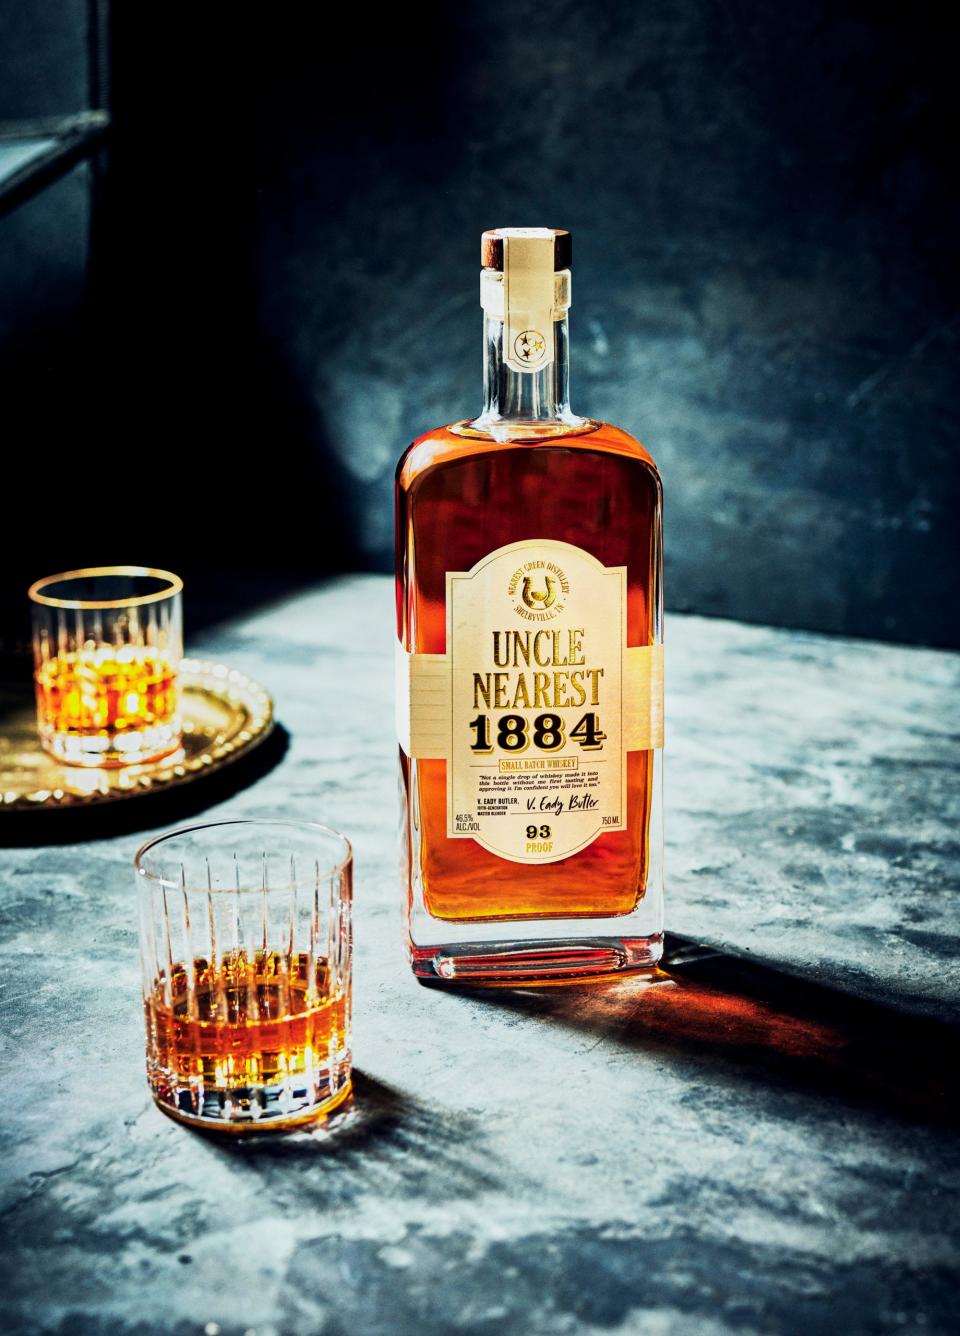 Uncle Nearest 1884 Small Batch Whiskey is a 93-proof whiskey.